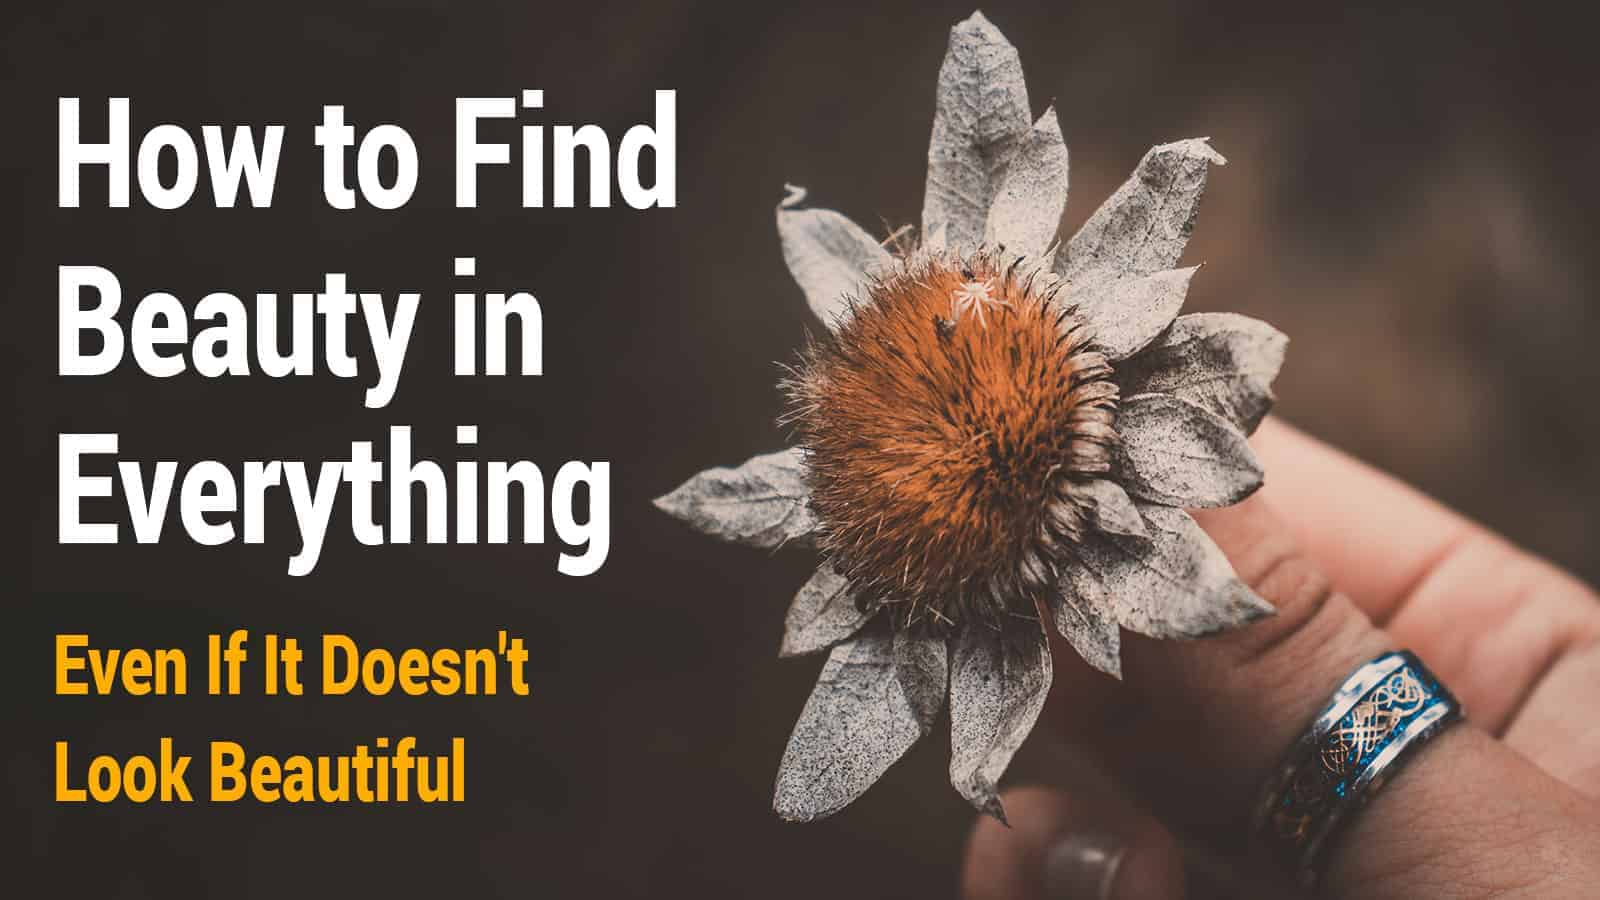 How to Find Beauty in Everything (Even If It Doesn’t Look Beautiful)